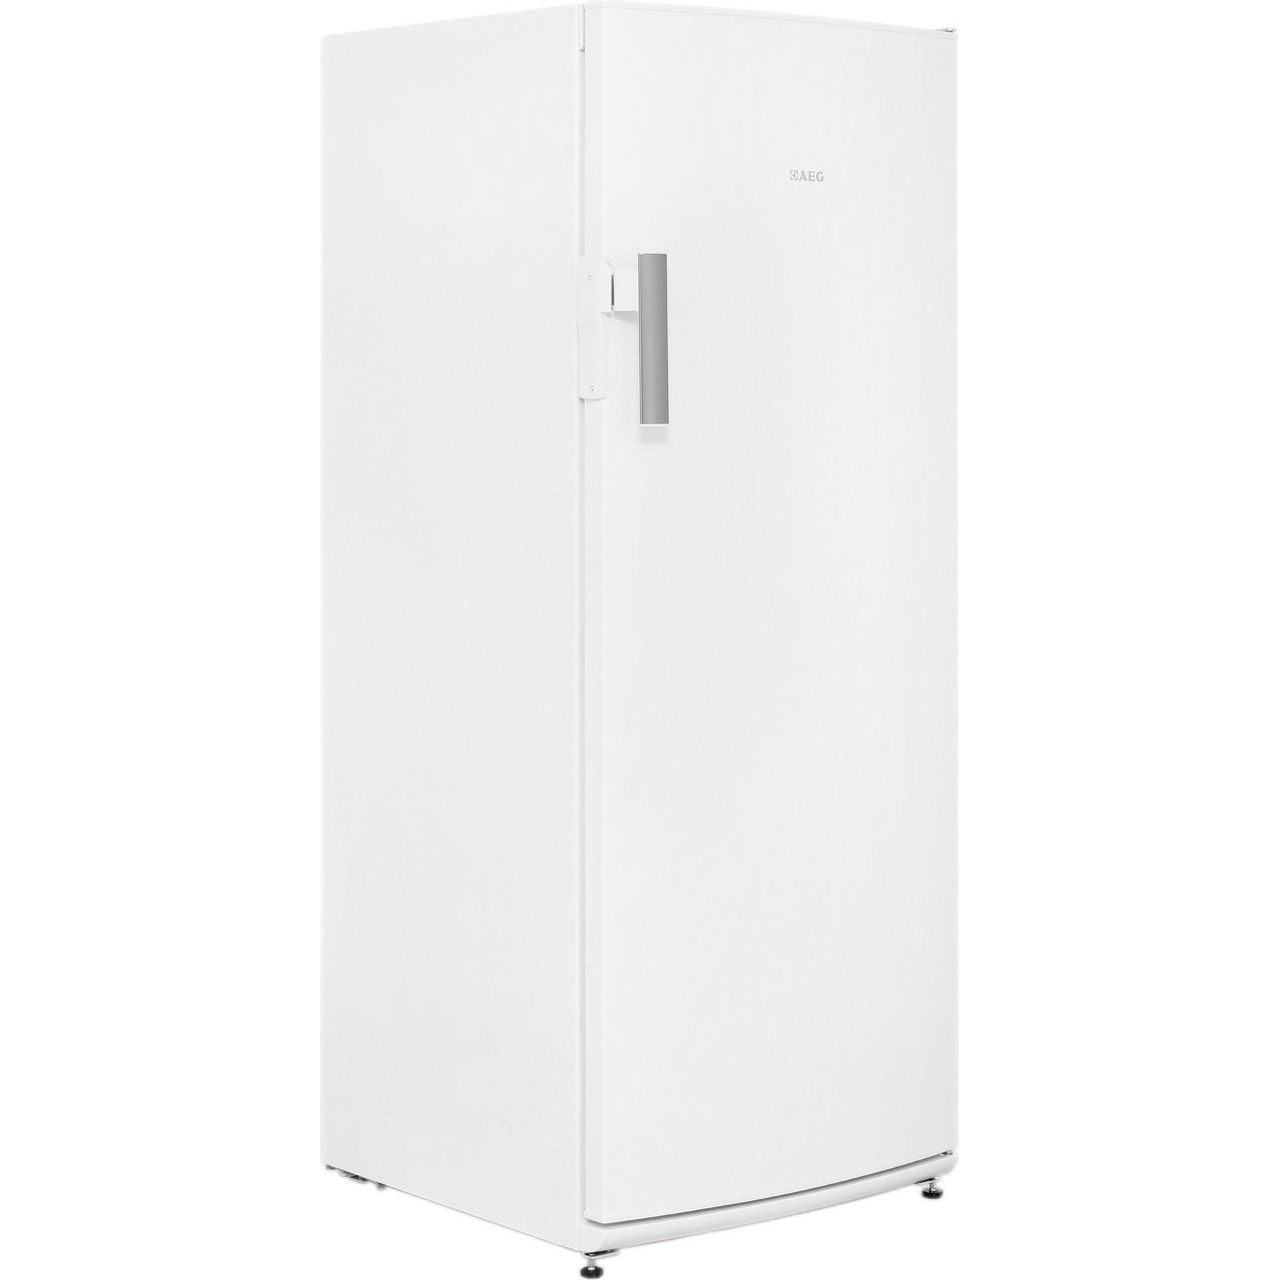 AEG AGB62226NW Frost Free Upright Freezer Review